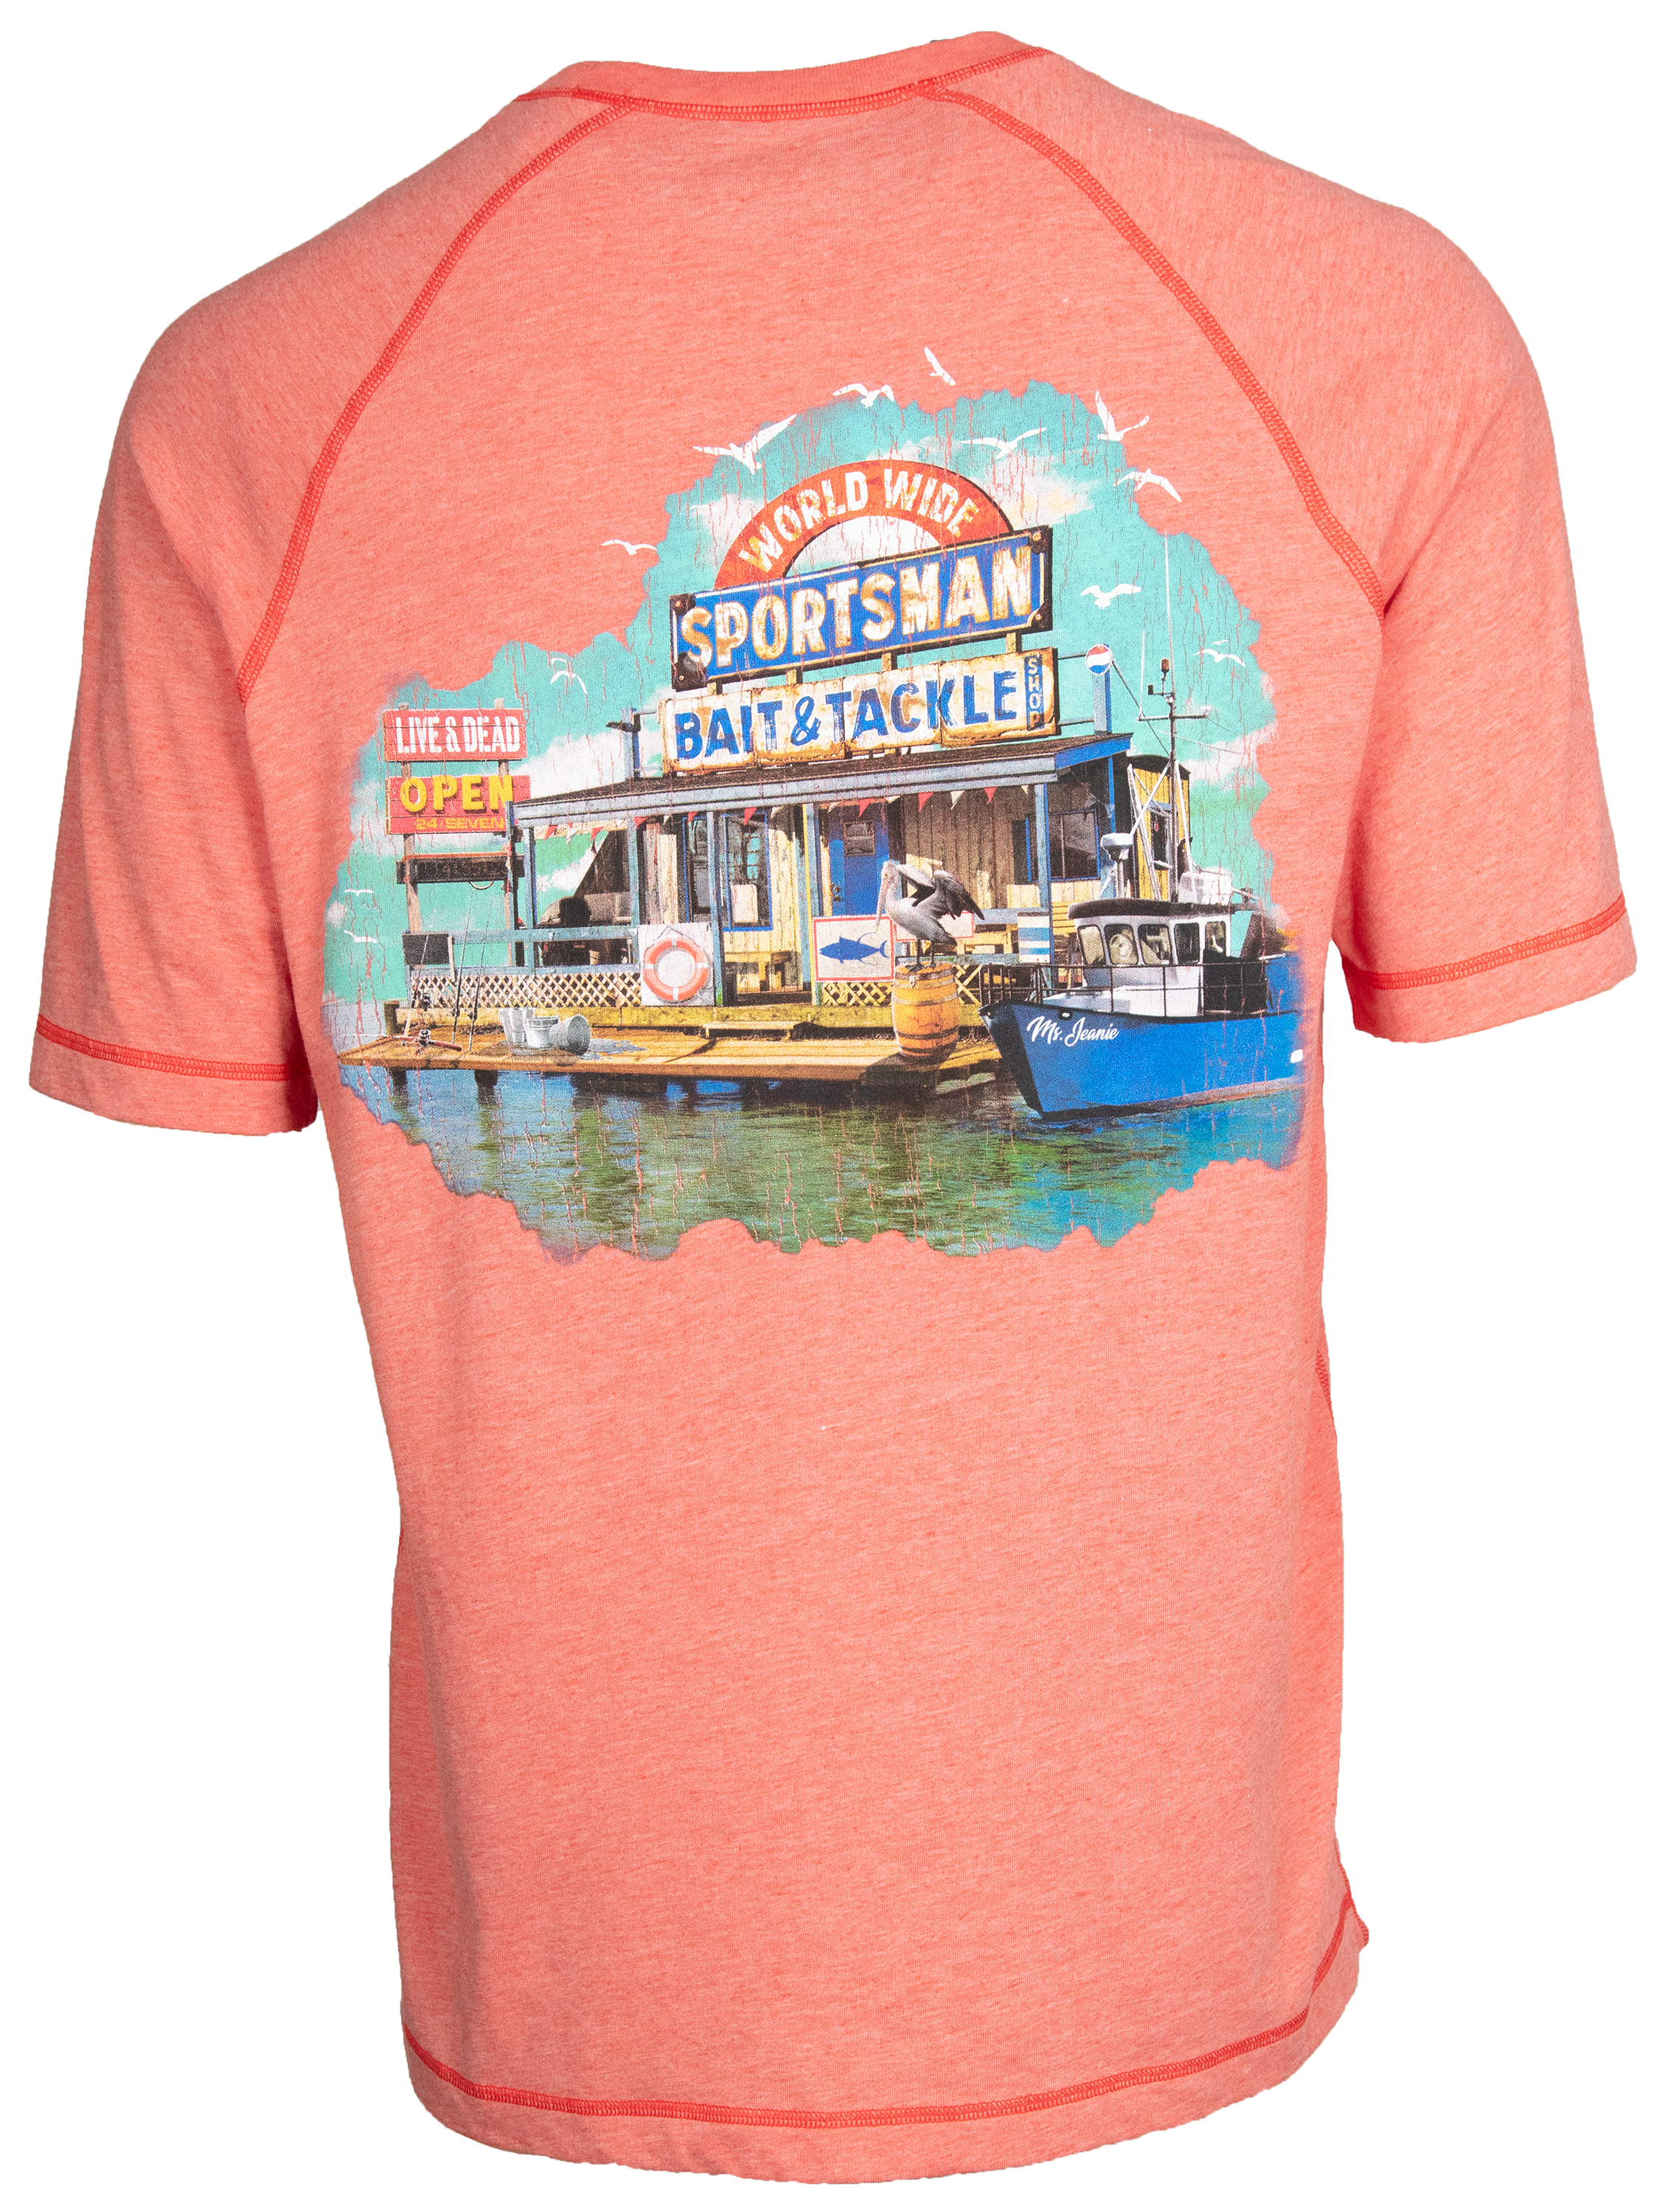 World Wide Sportsman Tackle Shop Graphic Short-Sleeve T-Shirt for Men - Coral - S